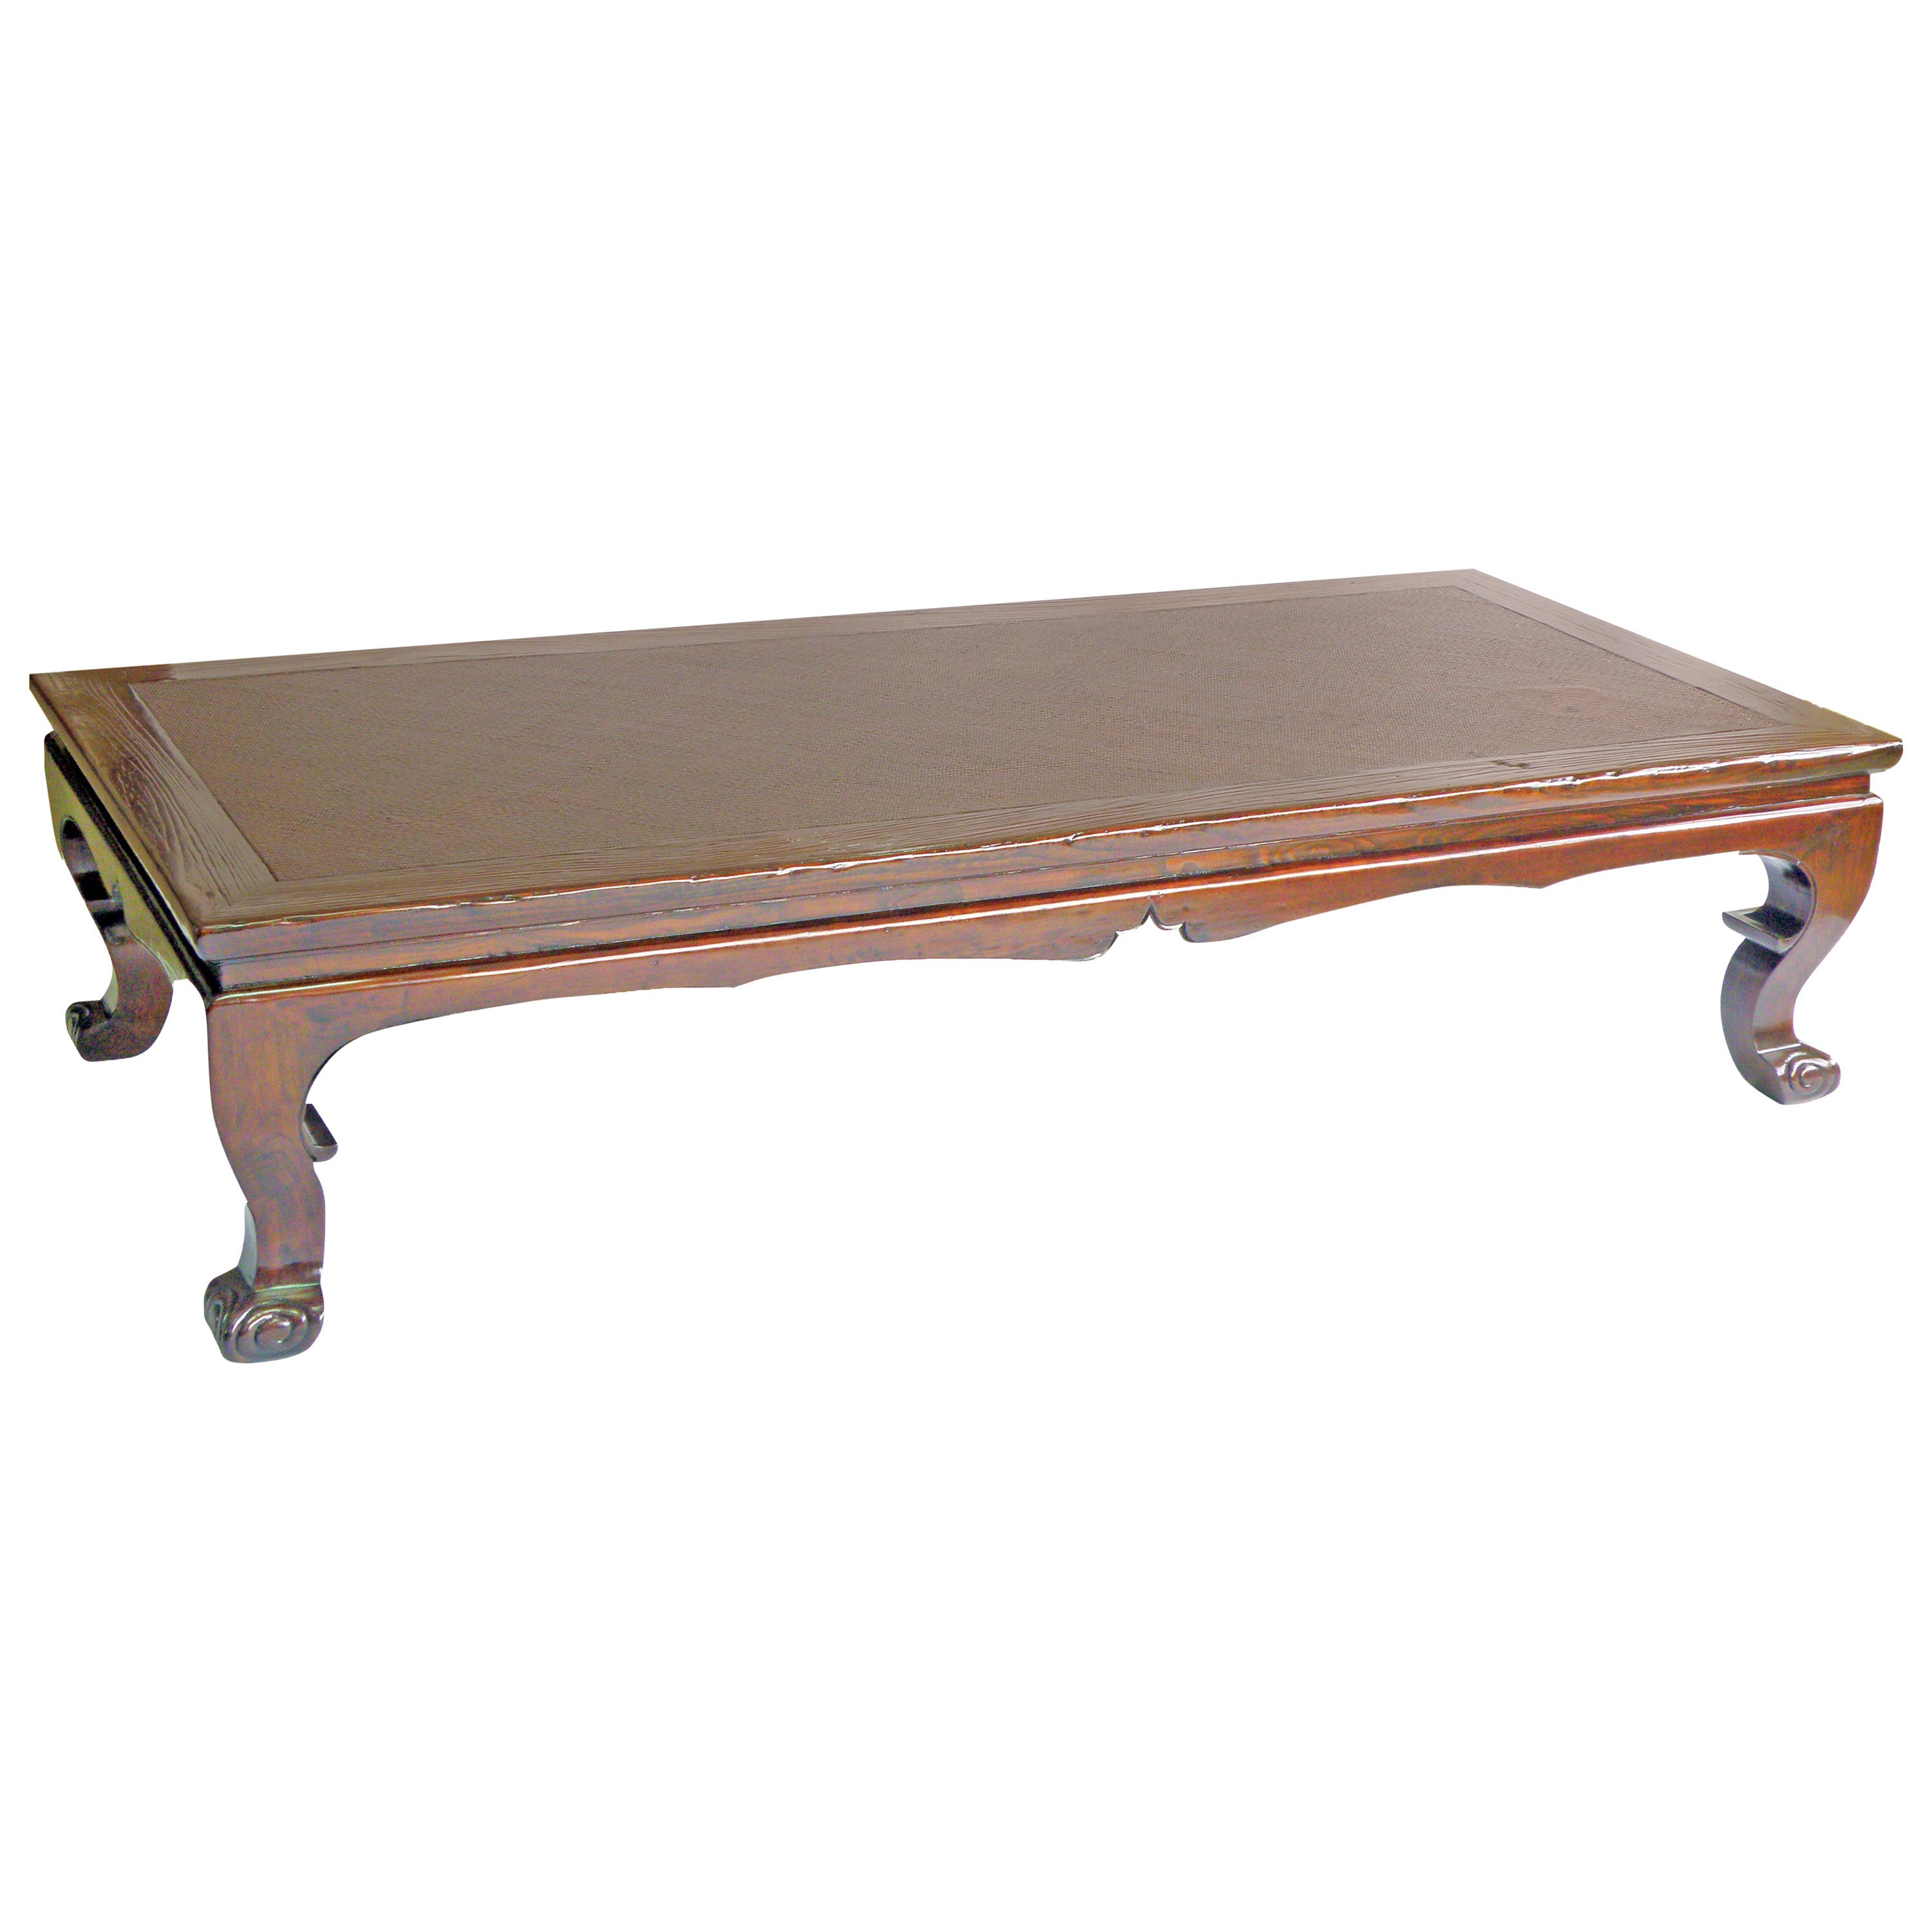 Large Antique Day Bed, Low Table or Coffee Table with Cabriole Legs, Chinoiserie